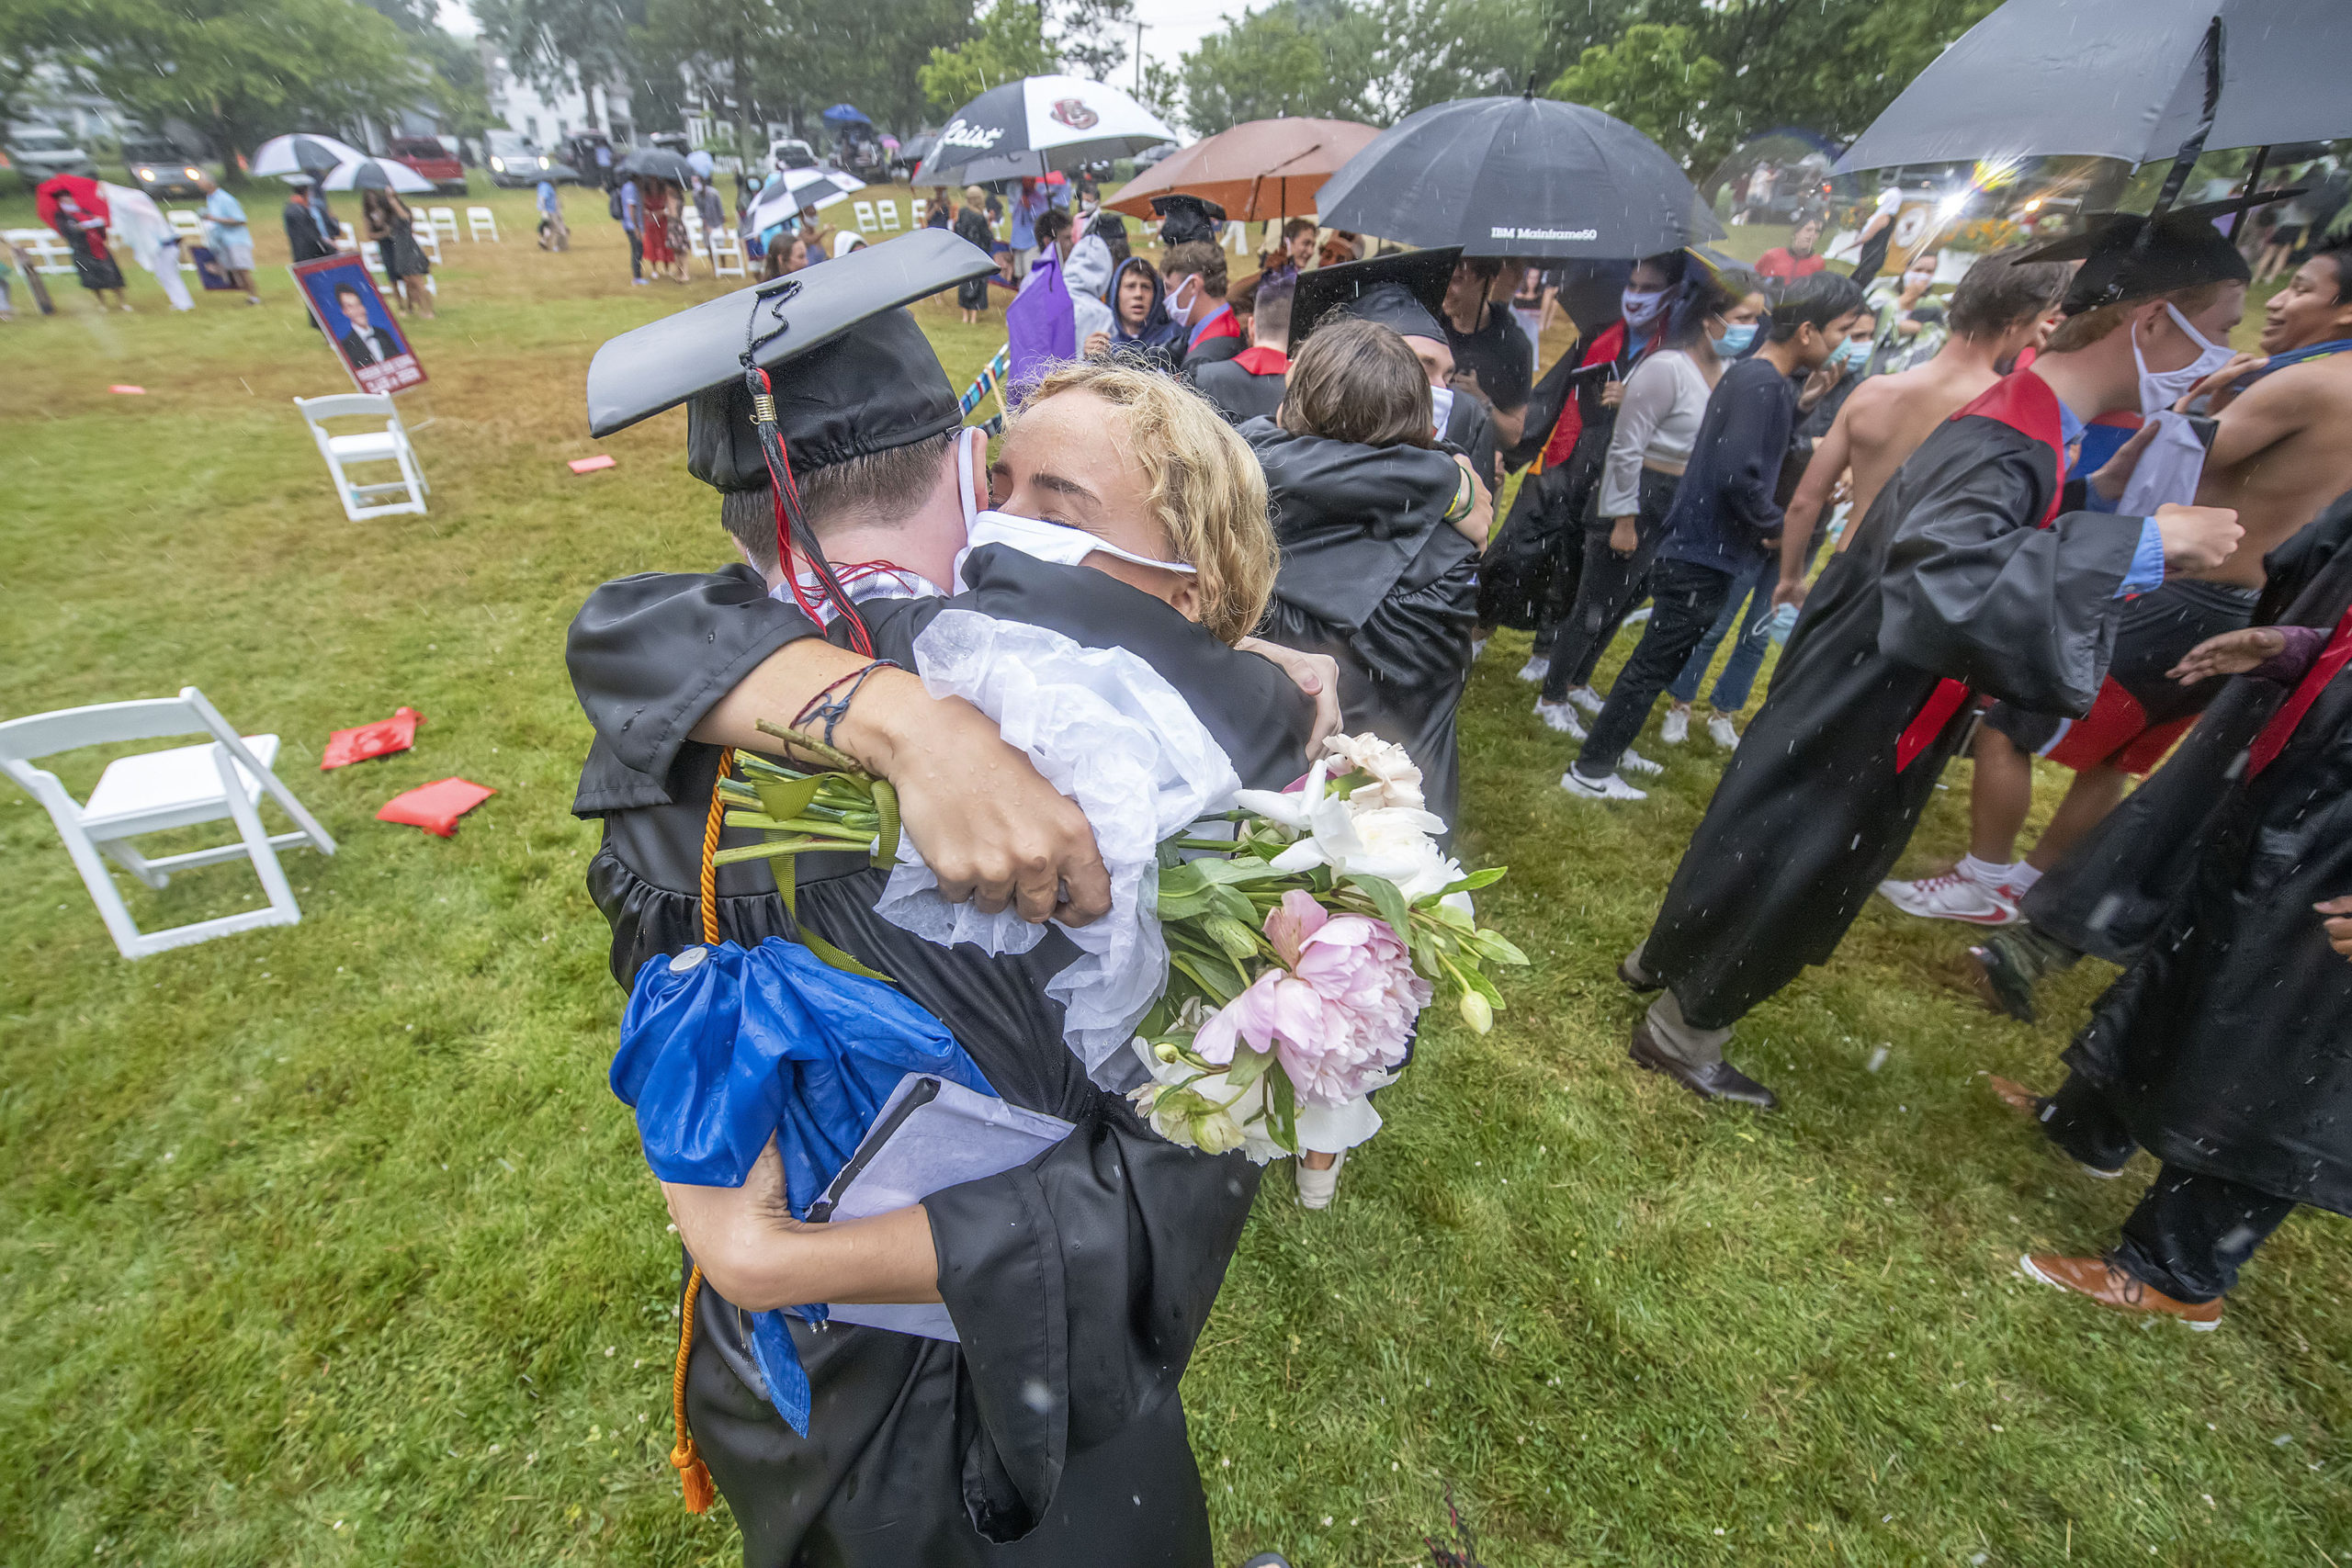 Ellie Borzilleri gets a big hug from Dylan Kruel following the Pierson High School 2020 Commencement Ceremony at Pierson High School on Saturday.